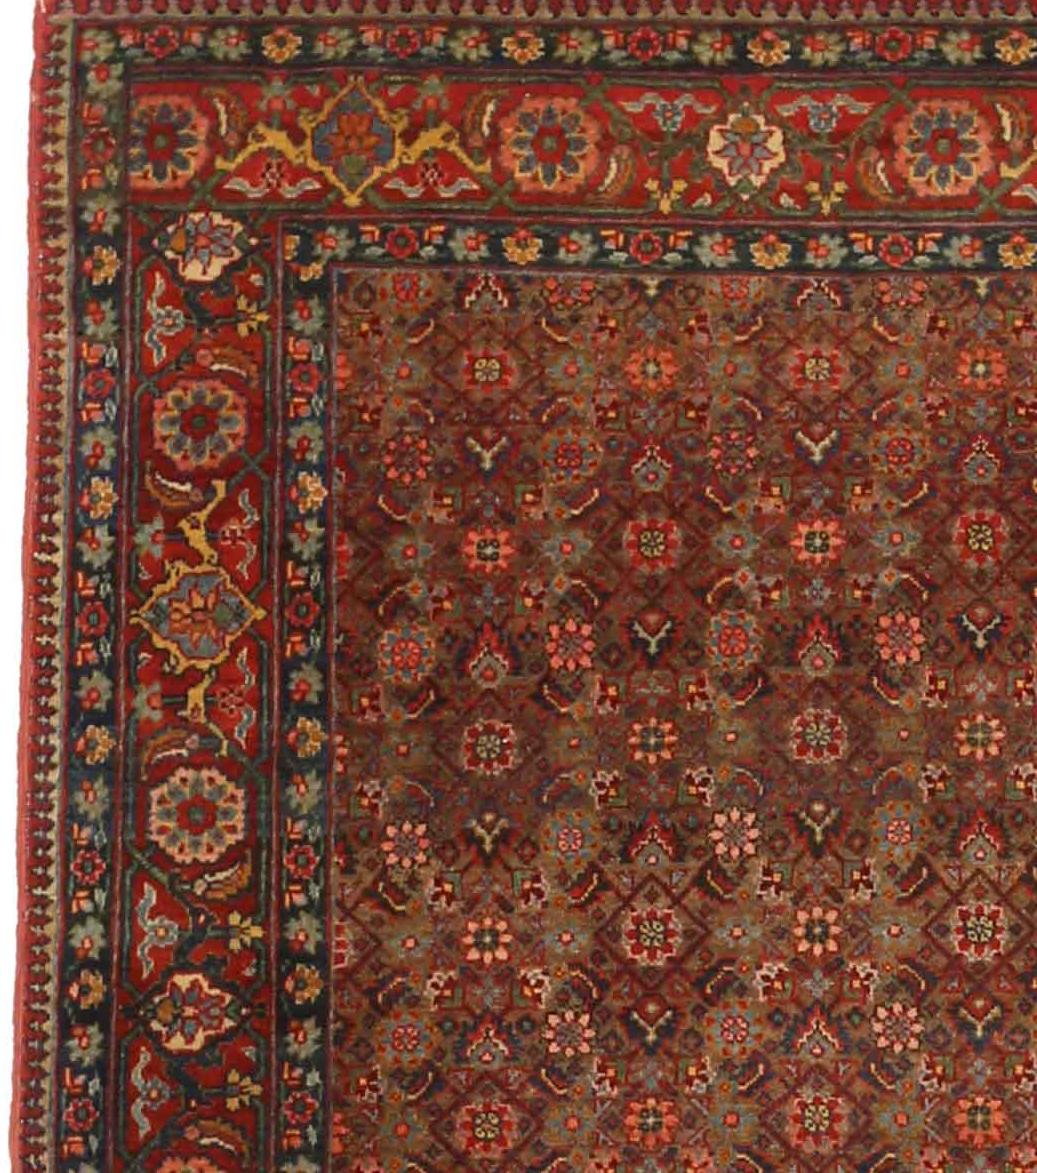 Antique Persian rug handwoven from the finest sheep’s wool and colored with all-natural vegetable dyes that are safe for humans and pets. It’s a traditional Tabriz weaving featuring a lovely ensemble of floral designs in red and green over a mixed